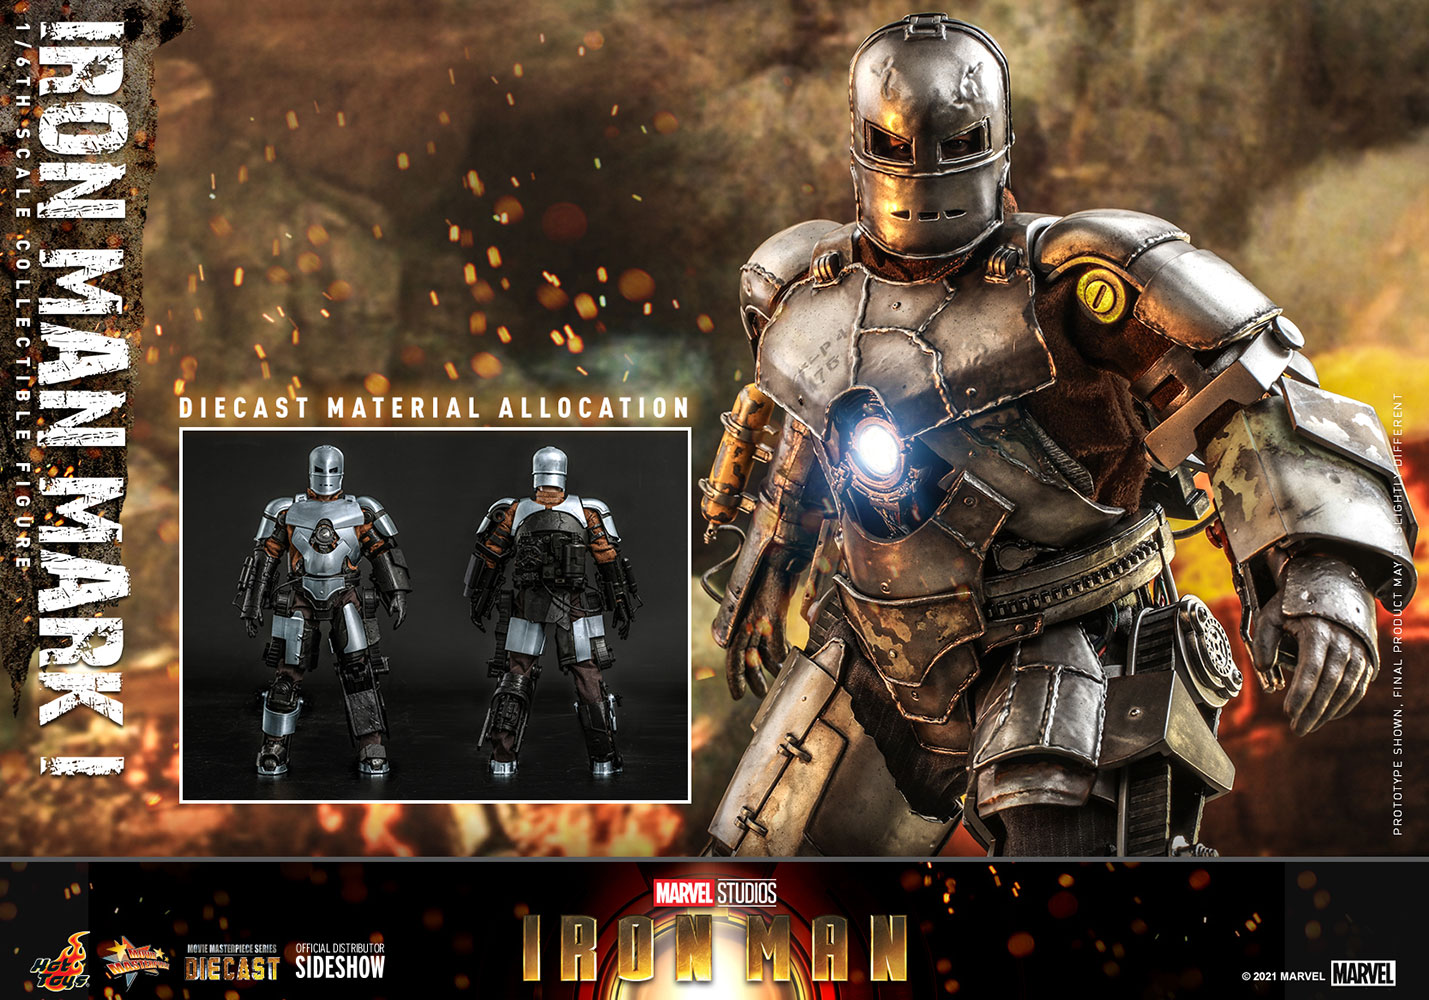 Iron Man Mark I Special Edition Diecast Sixth Scale Figure